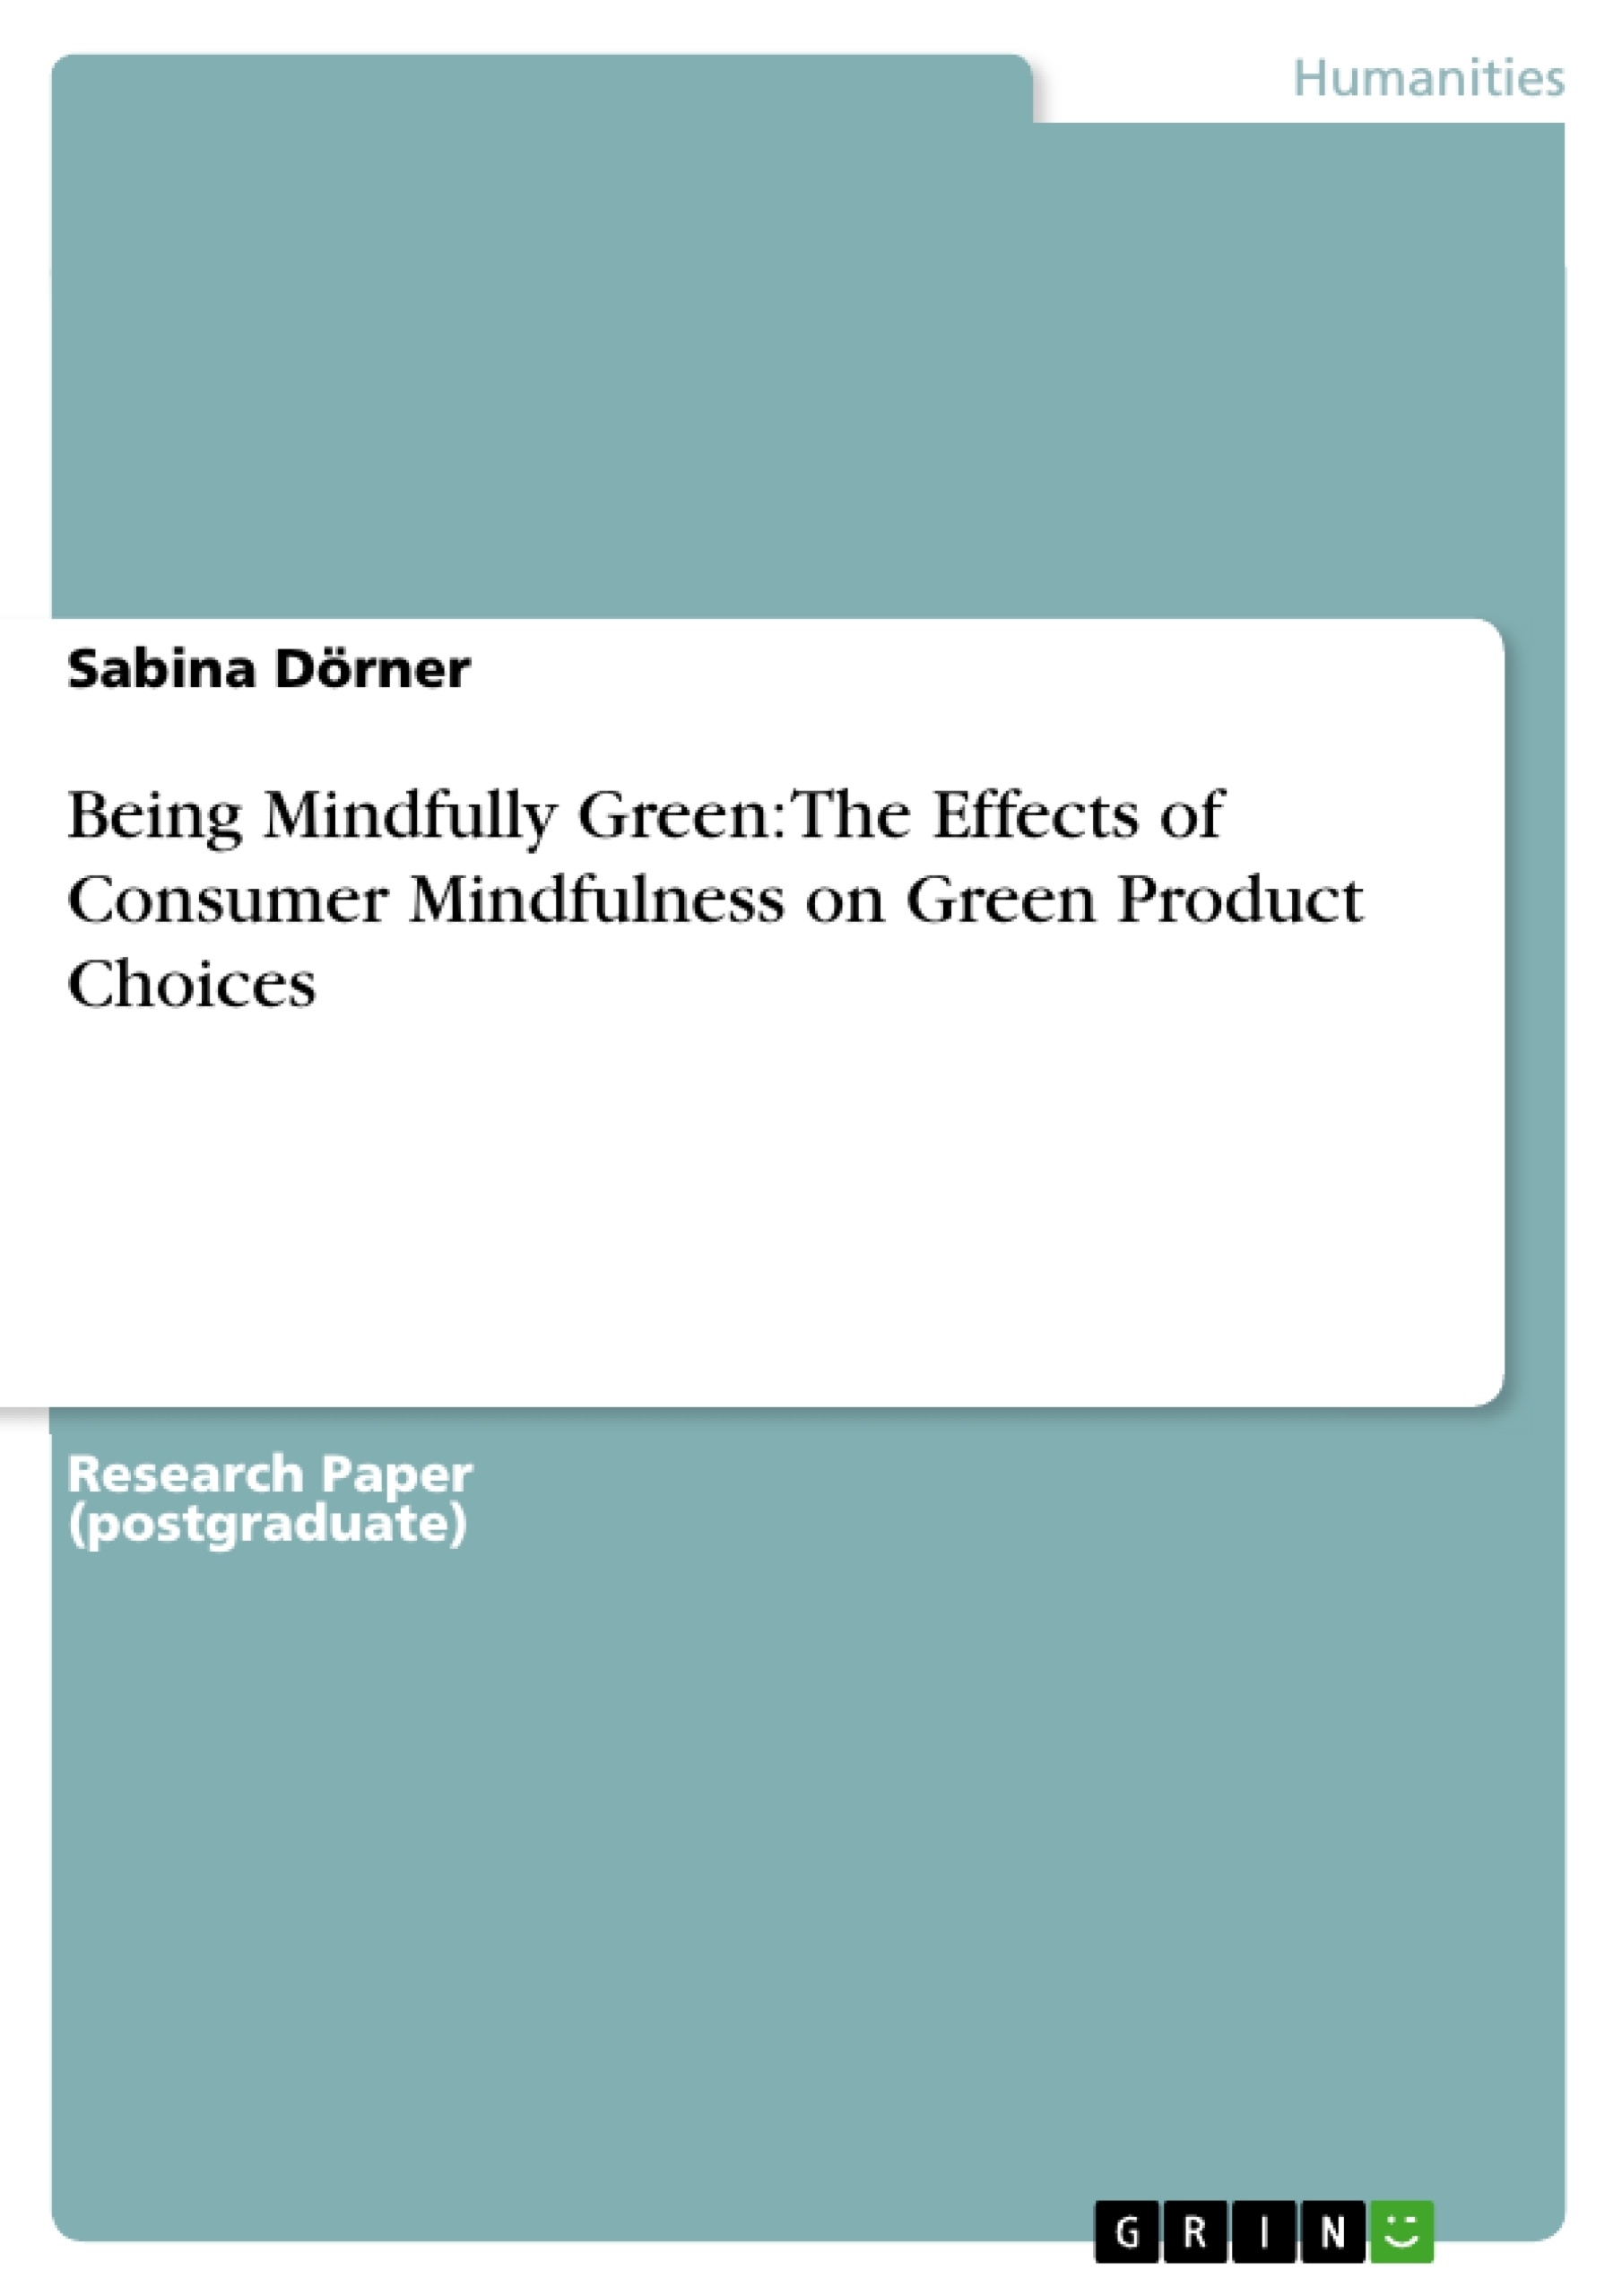 Titre: Being Mindfully Green: The Effects of Consumer Mindfulness on Green Product Choices